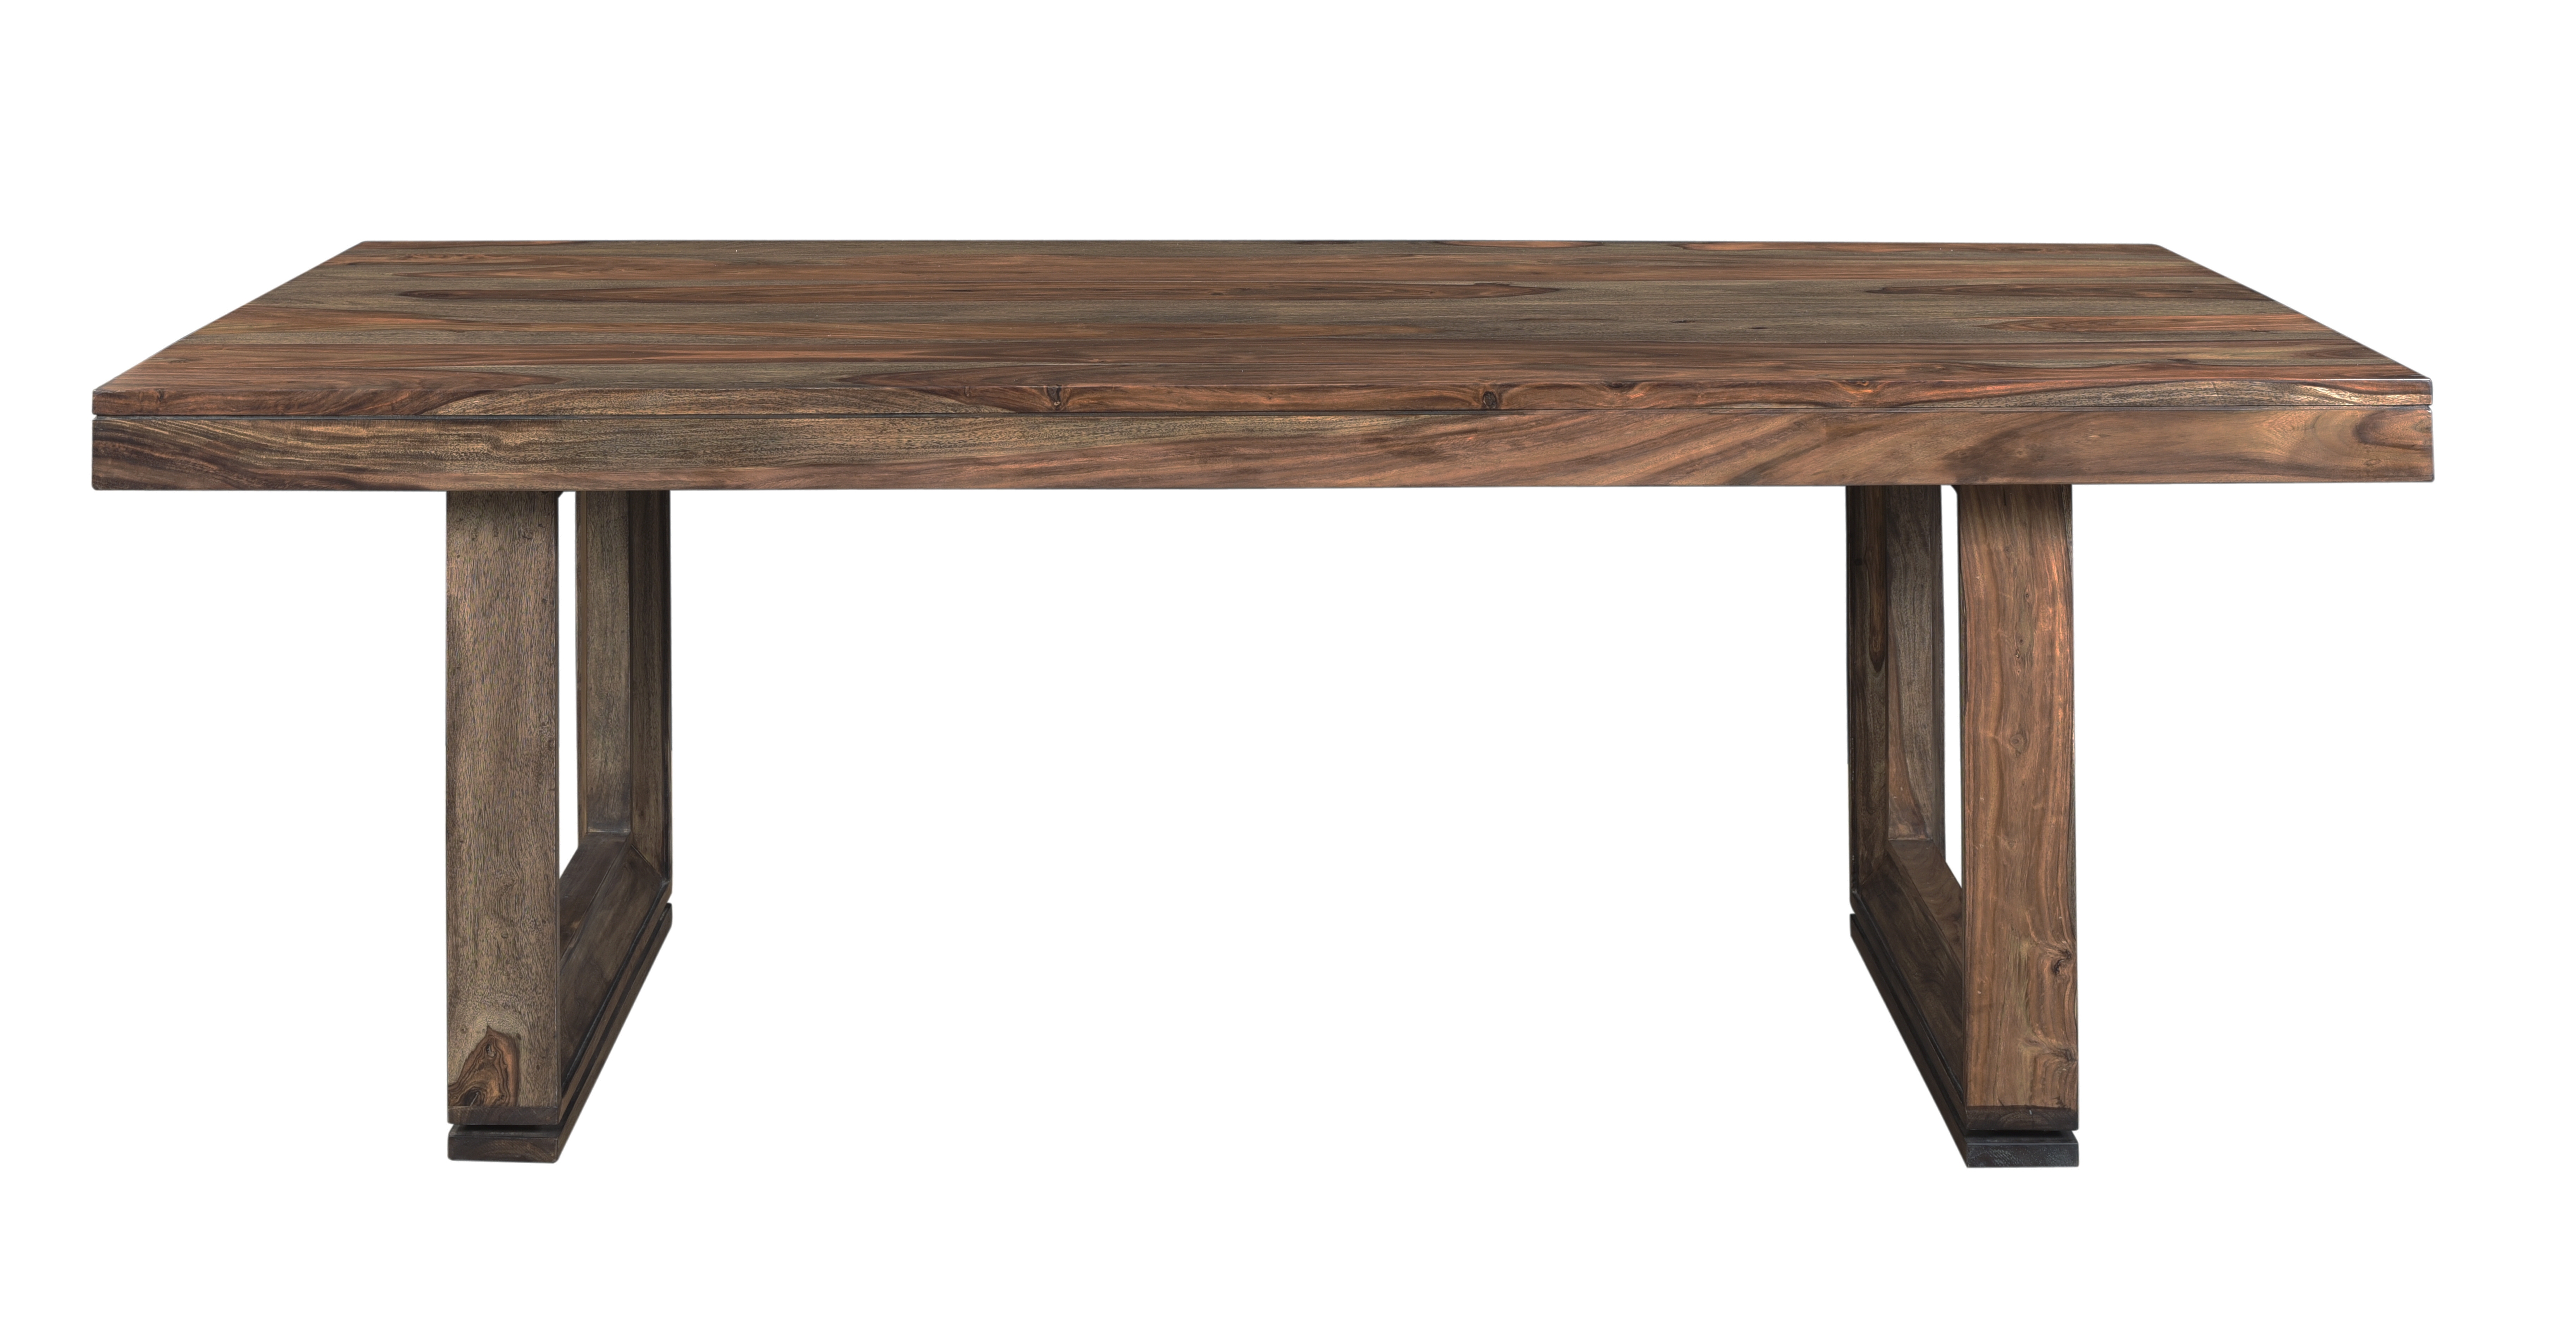 Brownstone Dining Table, Nut Brown - Image 1